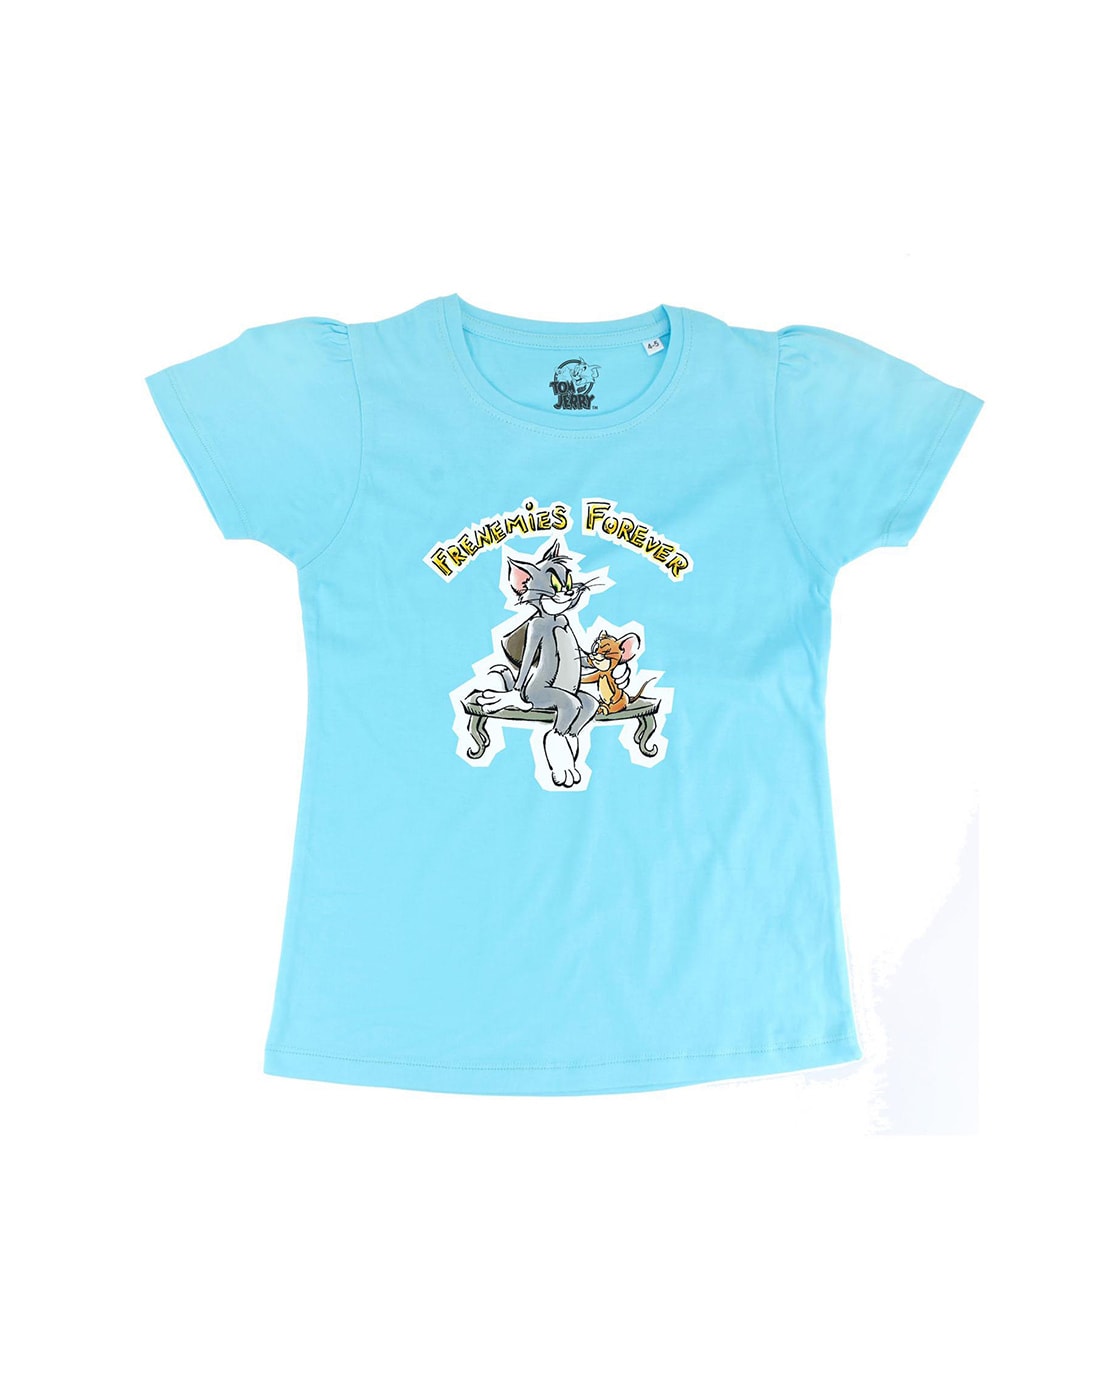 Buy Tom & Jerry Clothing Collection Online in India